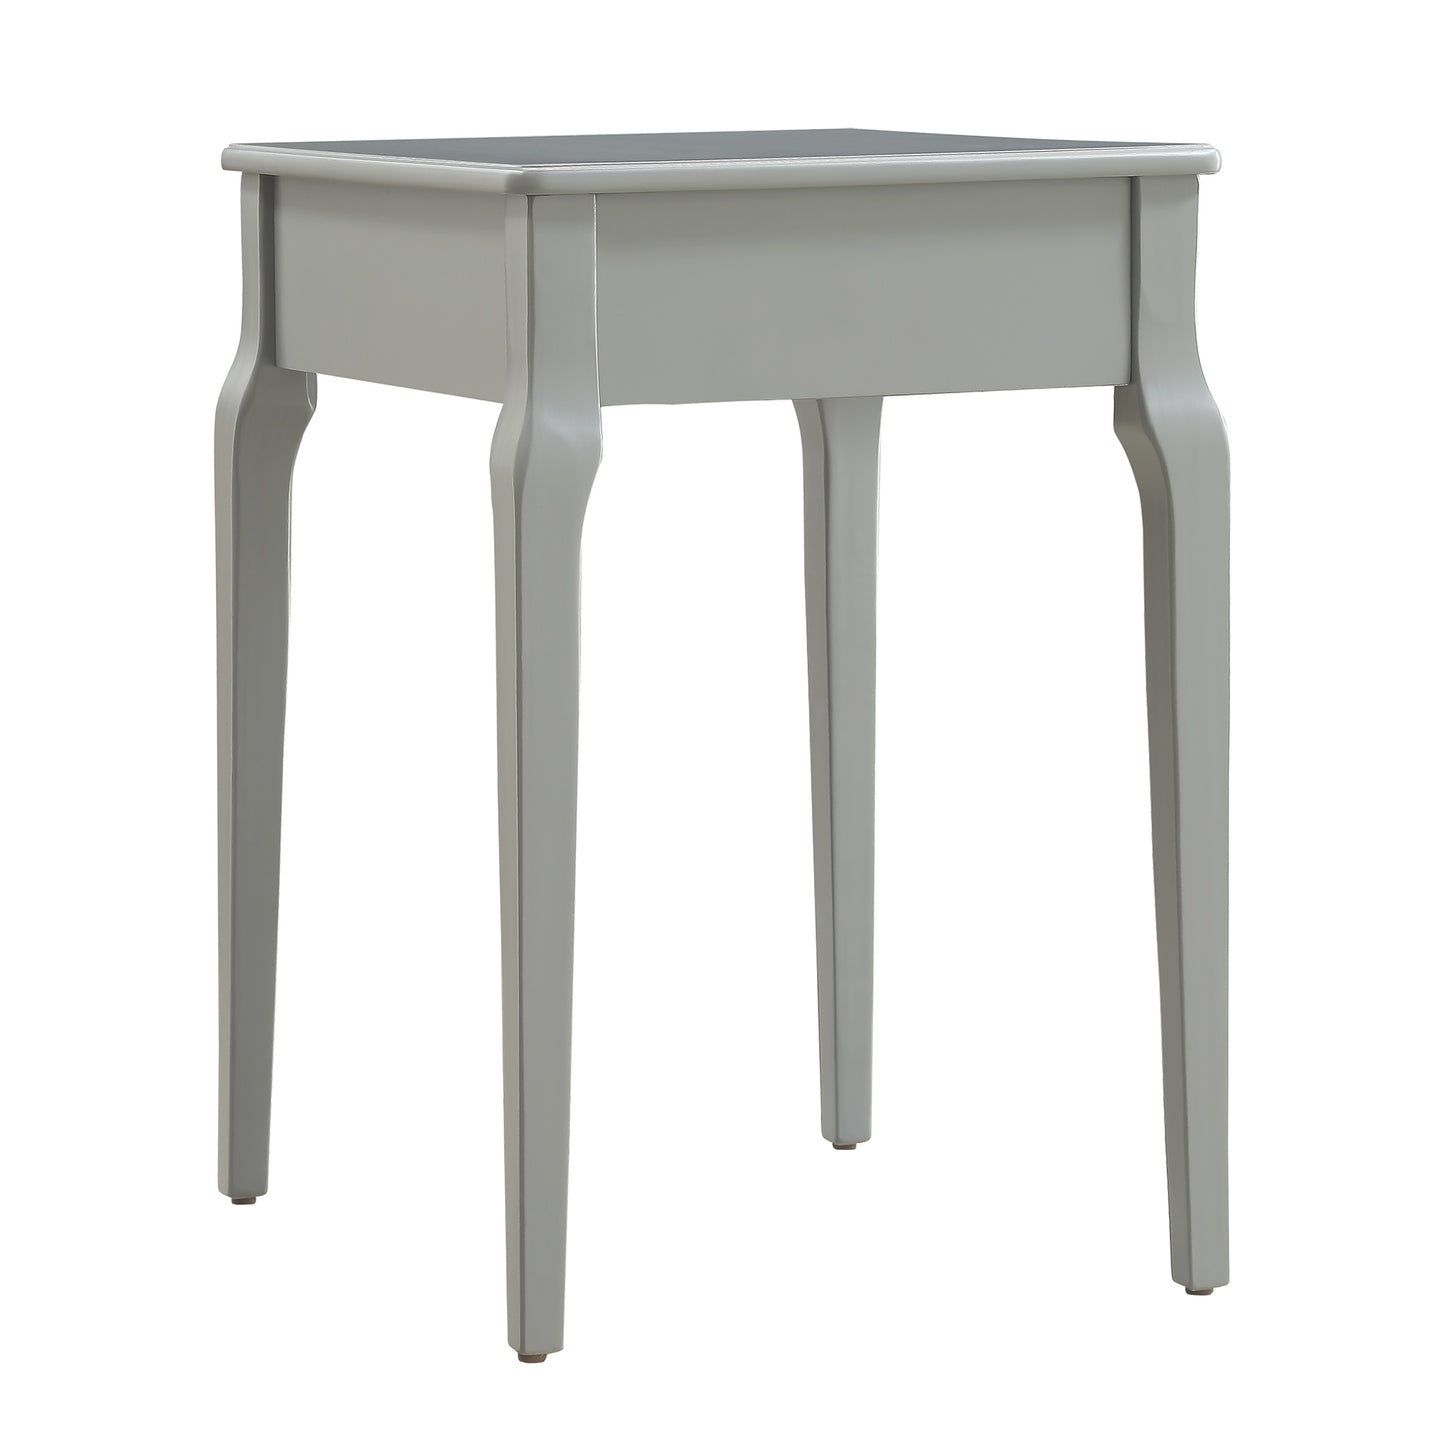 1-Drawer Wood Side Table - Grey